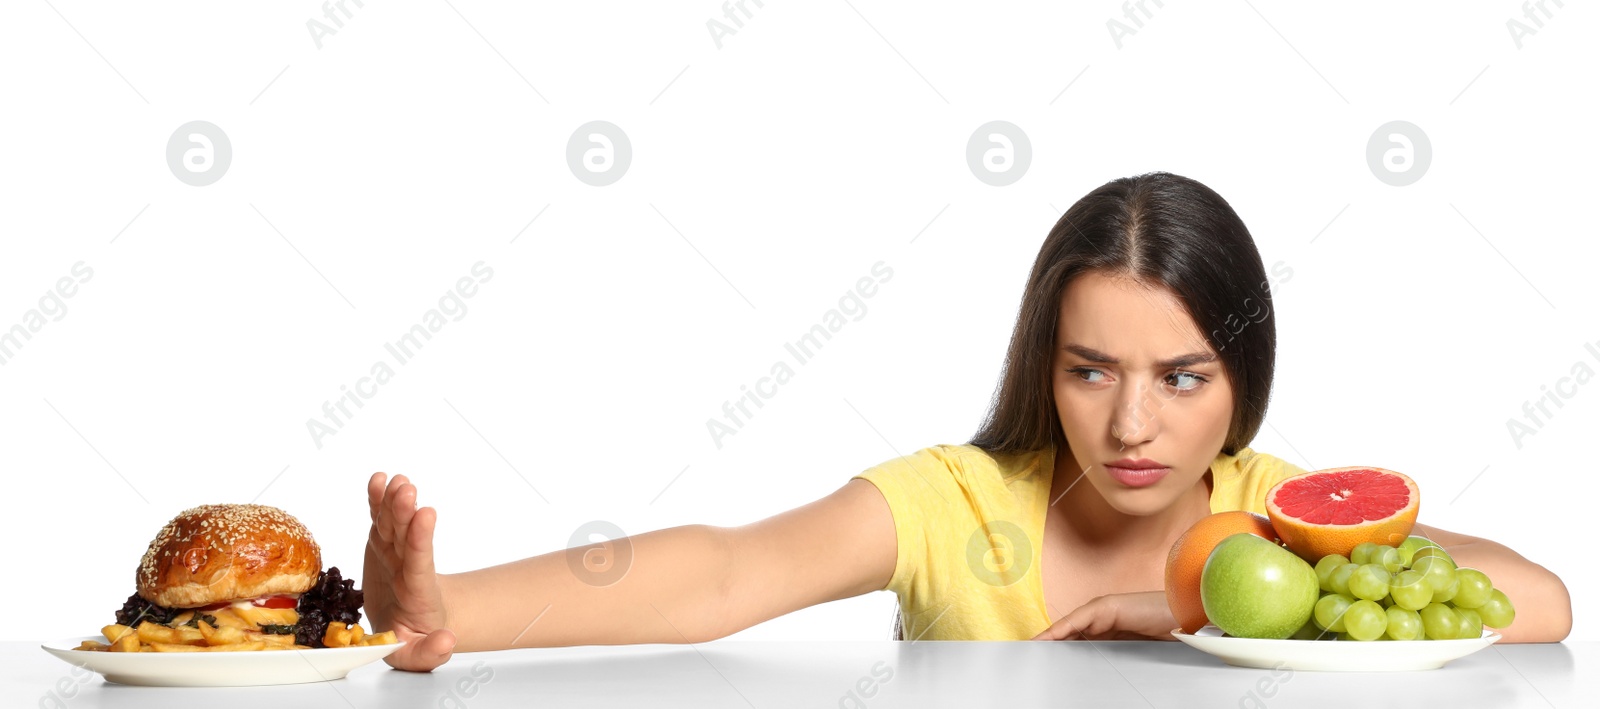 Photo of Woman choosing between fruits and burger with French fries on white background